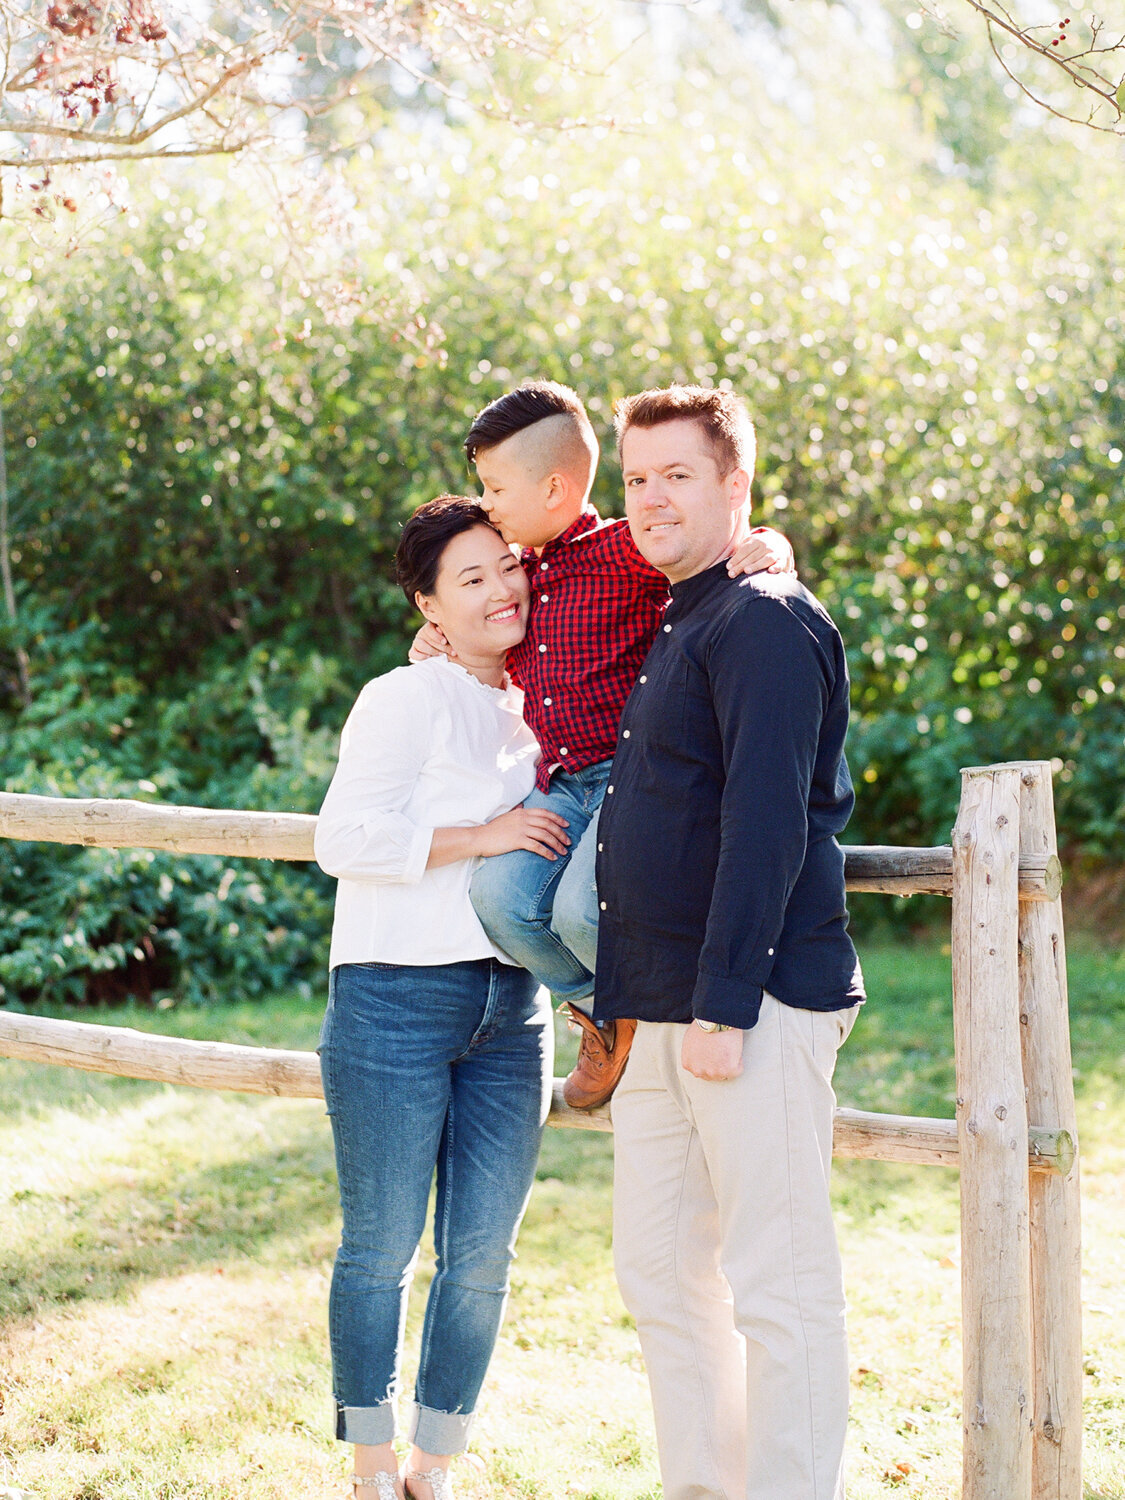 Jacqueline Anne Photography - Family Photographer in Halifax-4